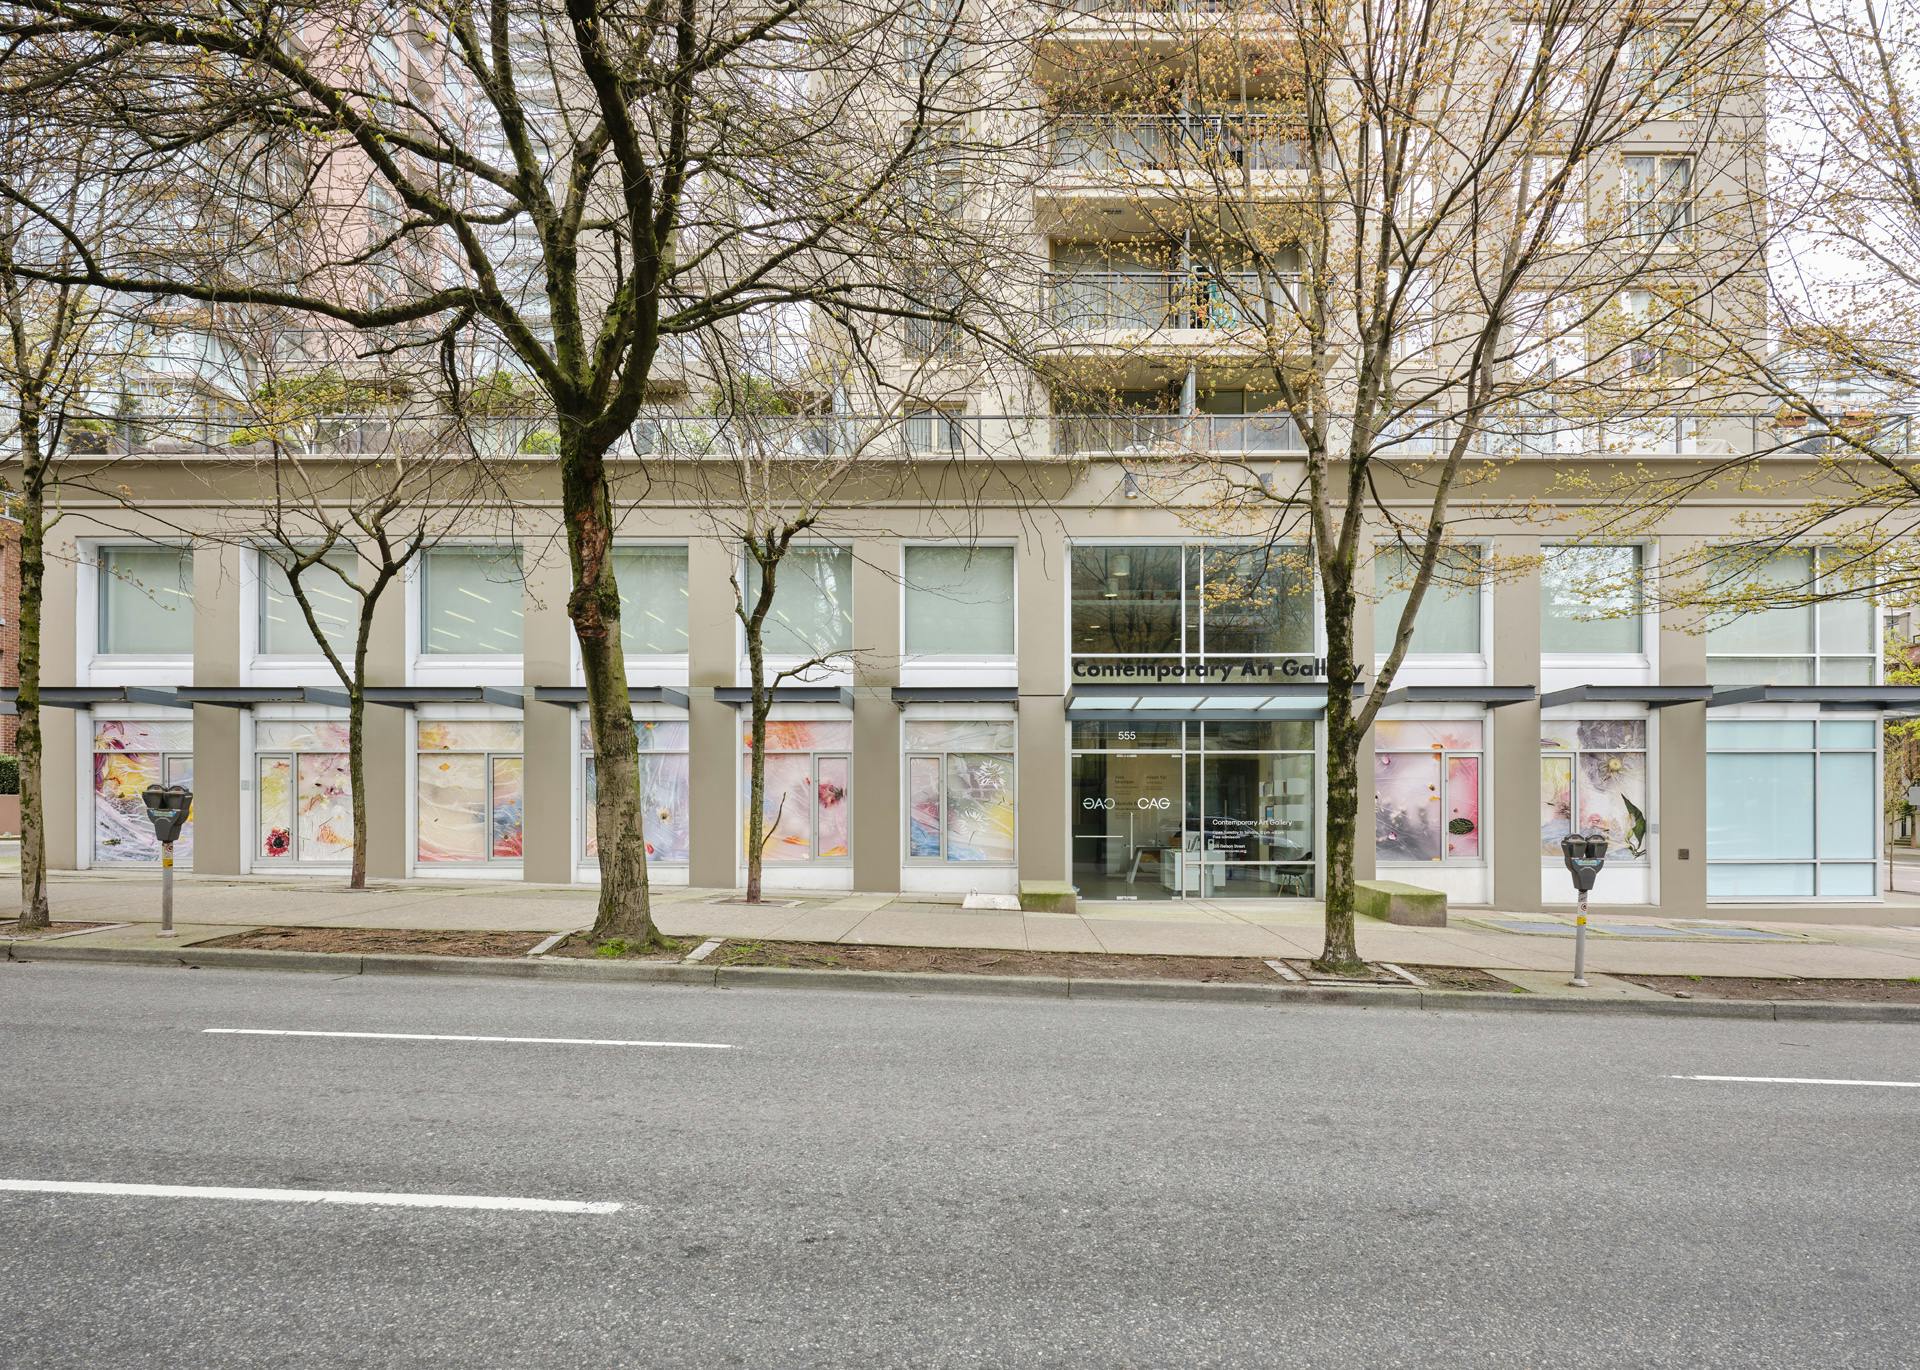 A view of the Contemporary Art Gallery building from across the street. The windows are  covered with vinyl photographs depicting diffuse colour,  indecipherable plant matter and wrinkled plastics. 